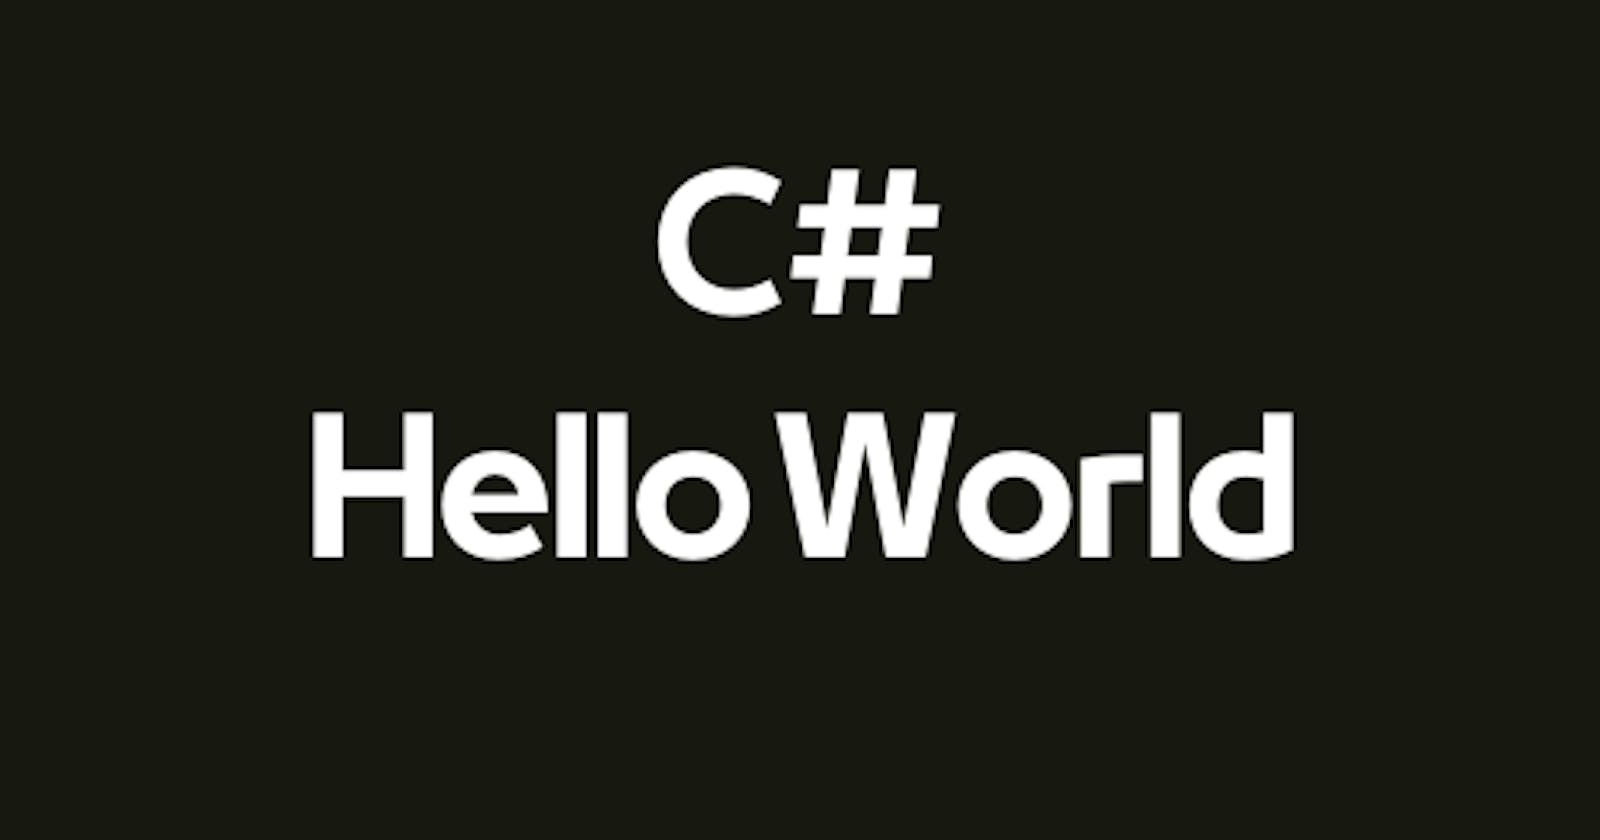 Hello World from C#